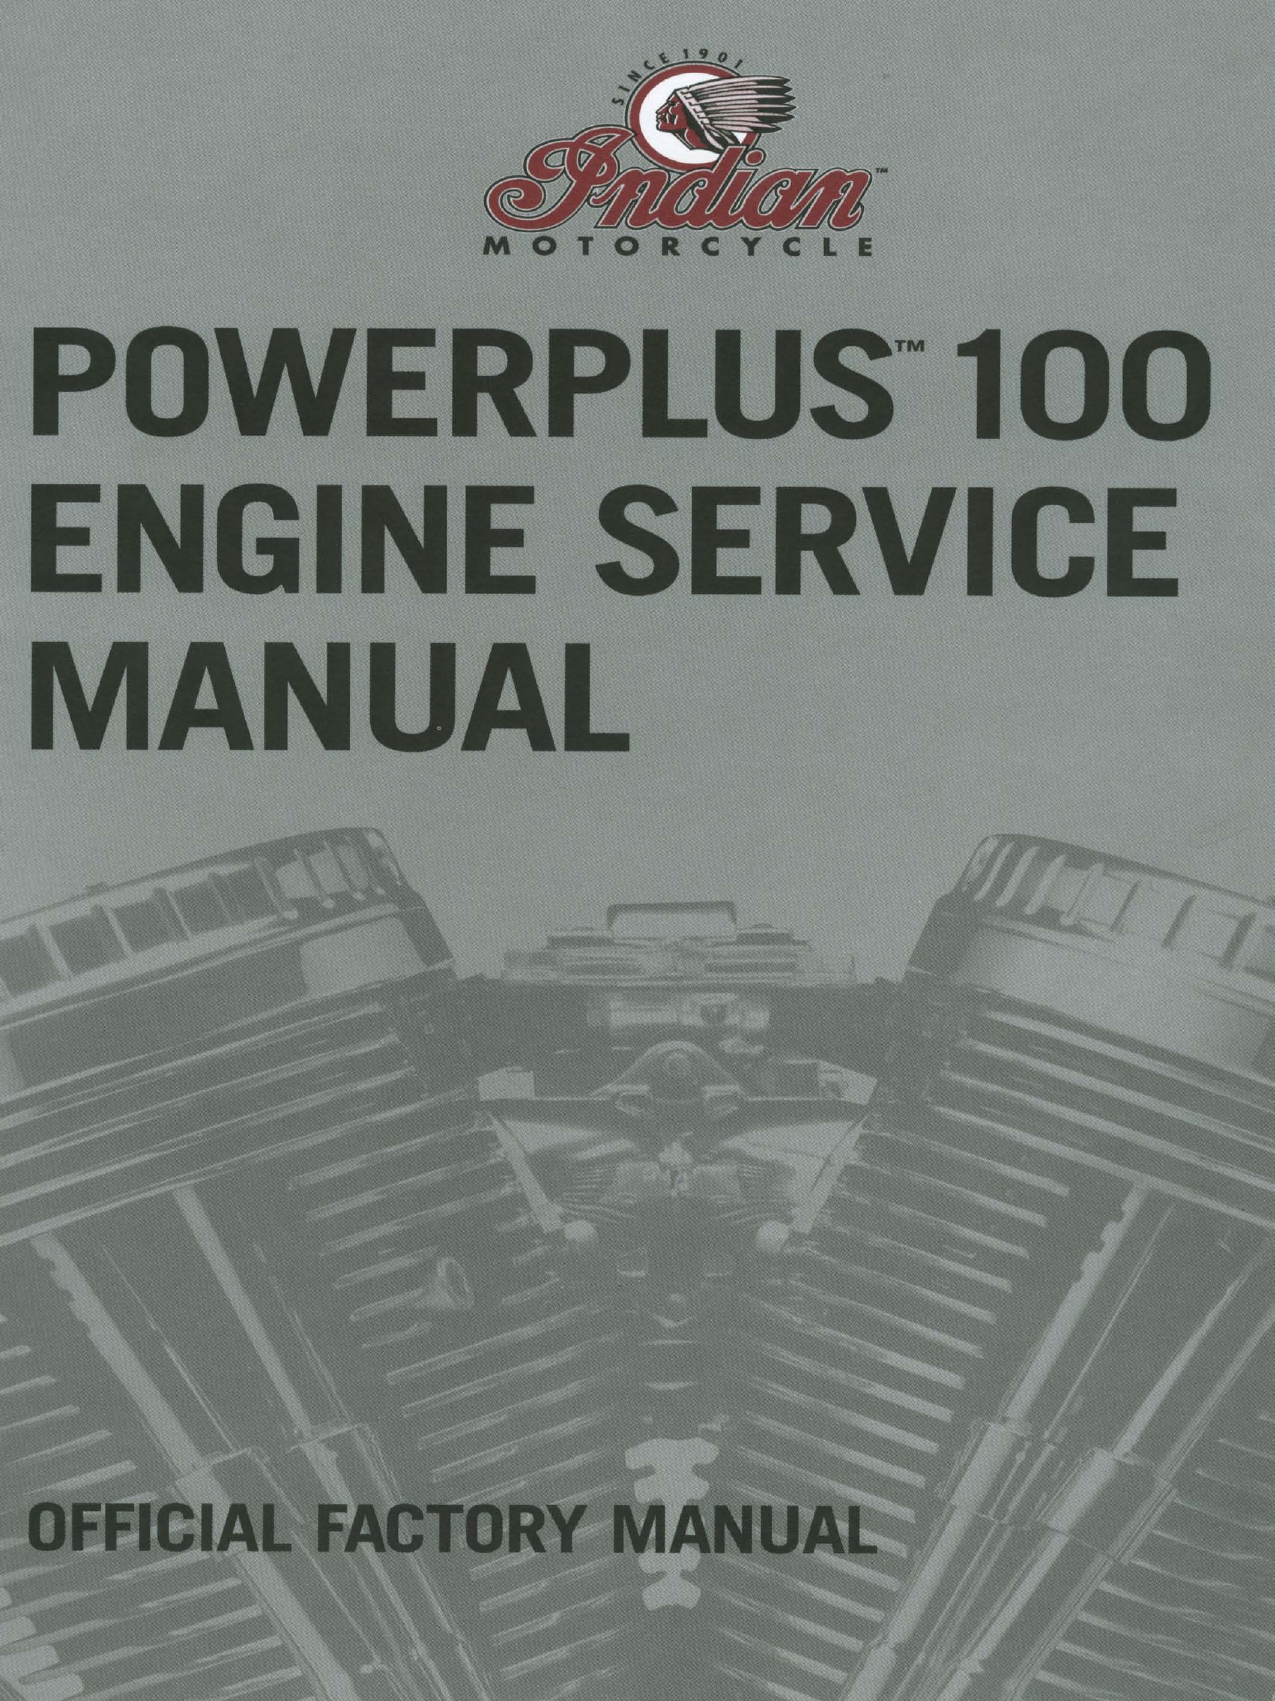 2002-2003 Indian Chief Powerplus 100 engine factory service manual Preview image 6